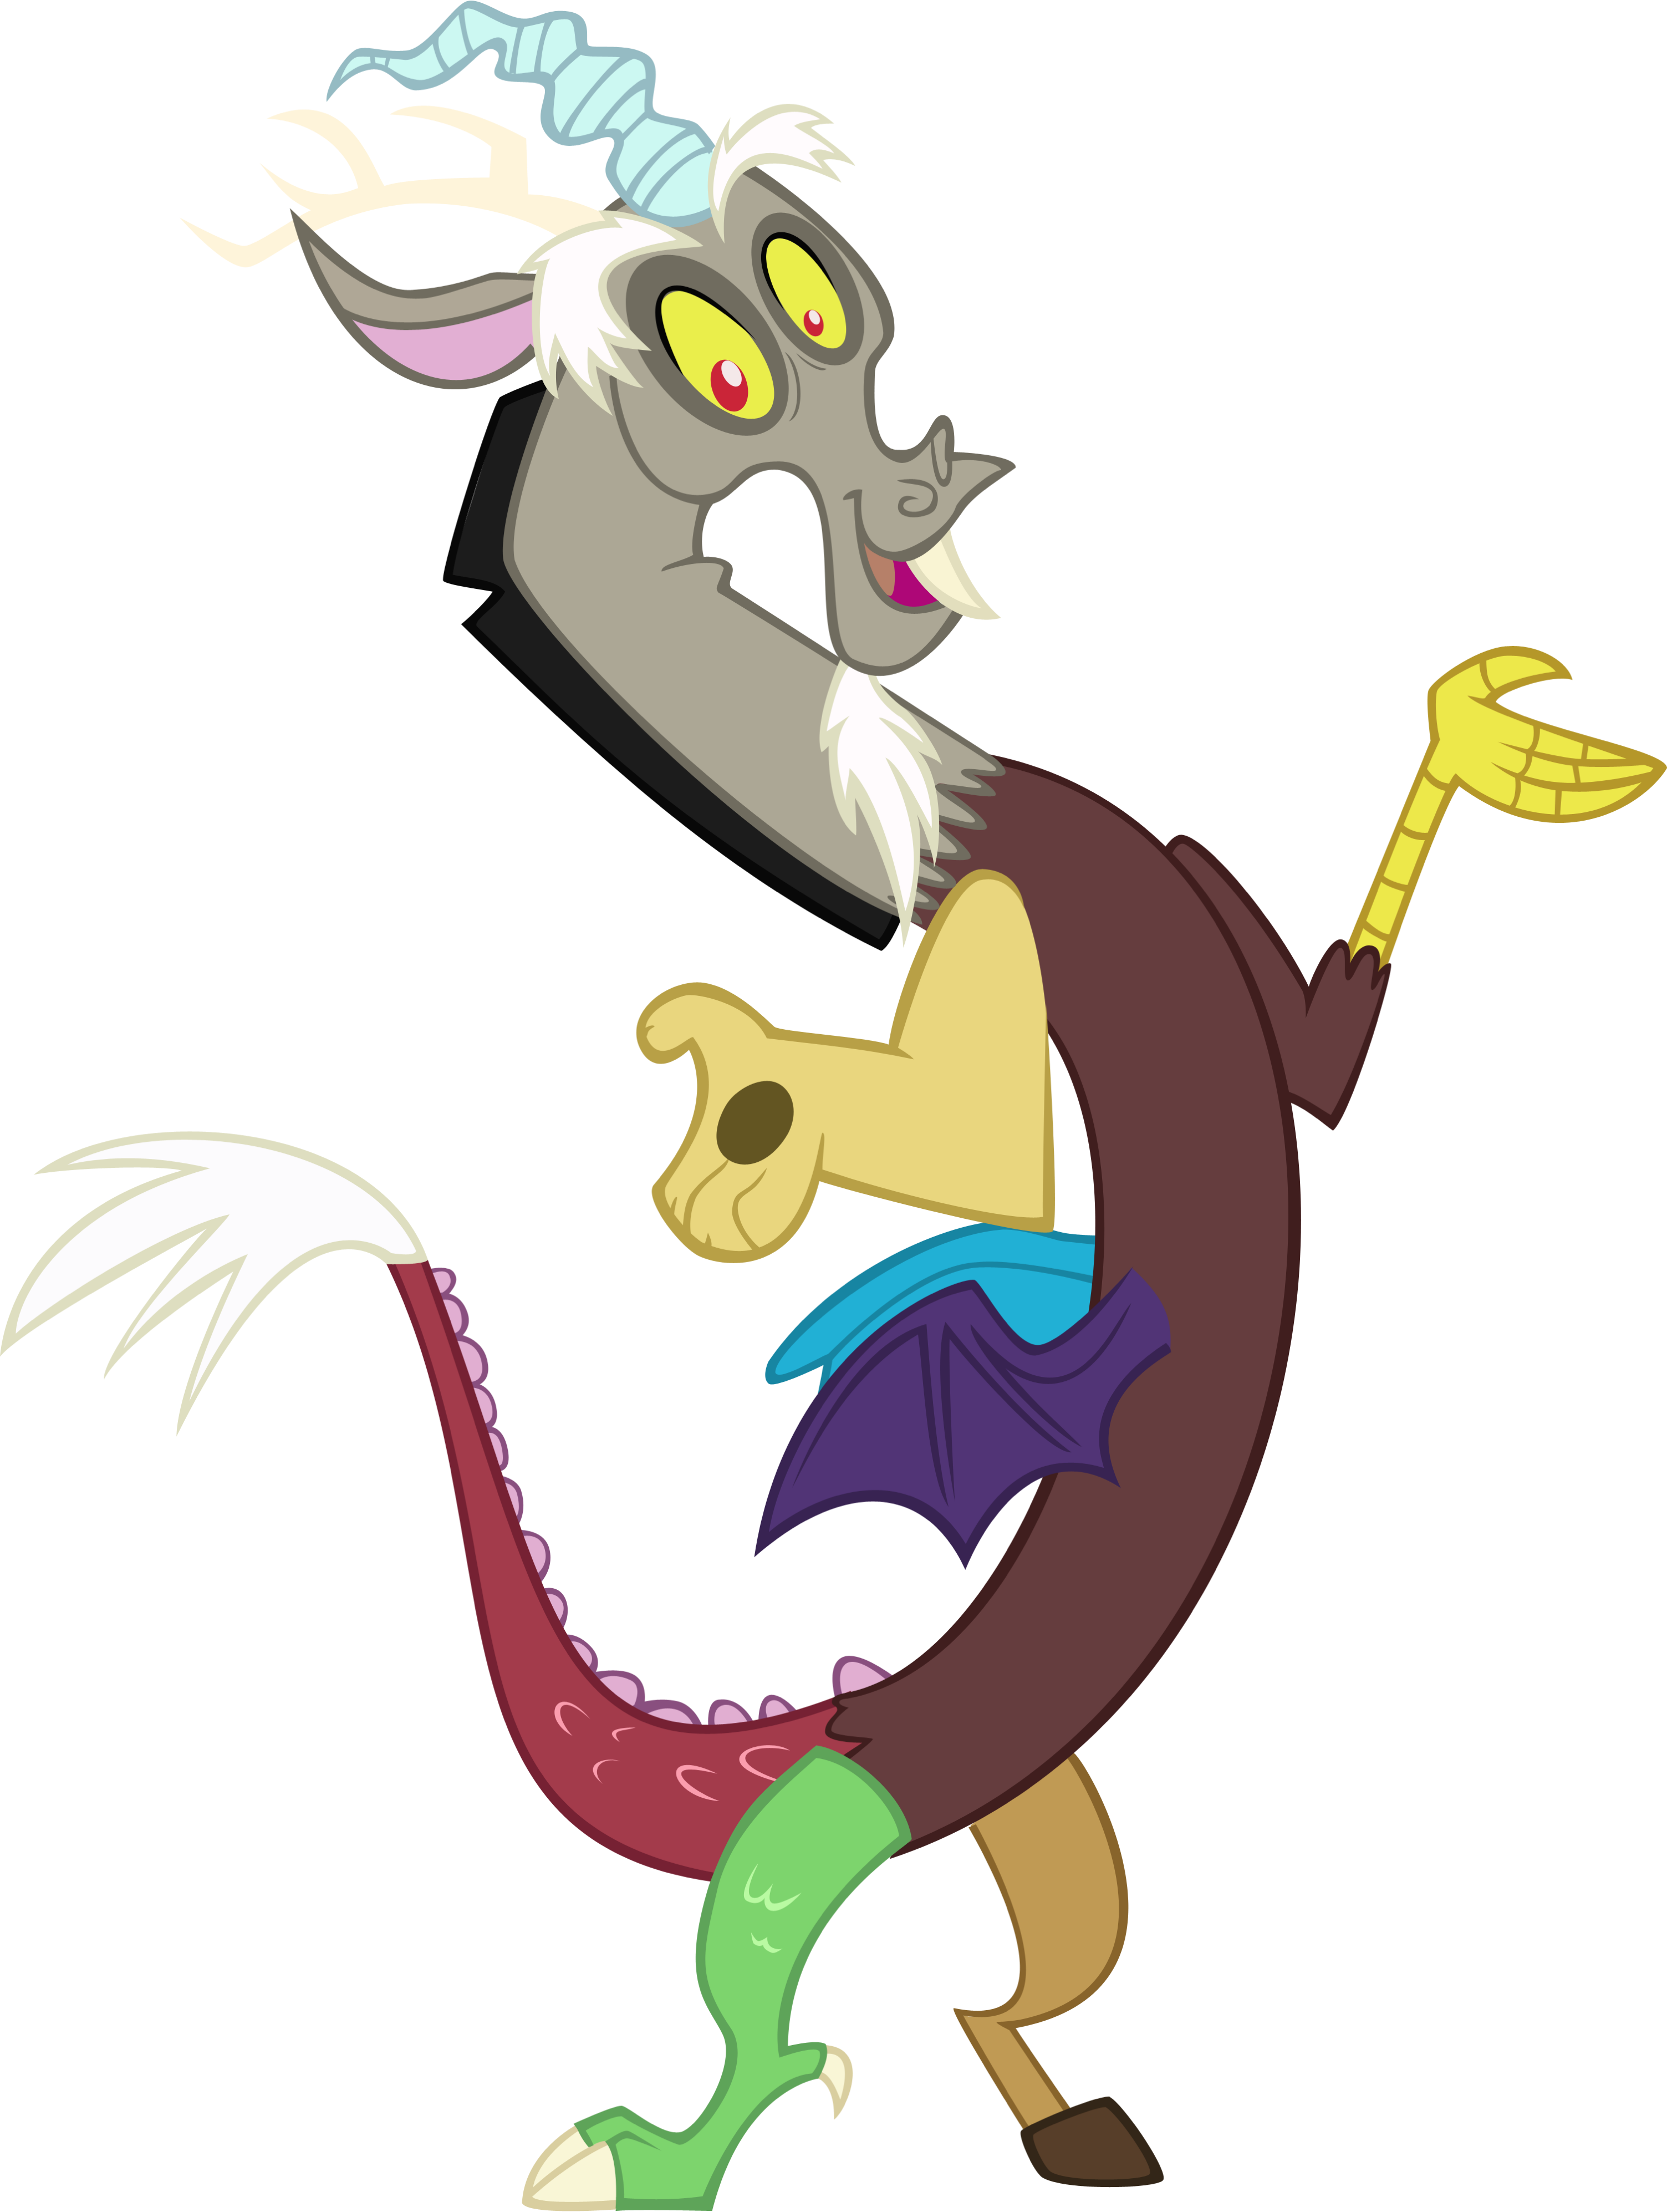 This visual is about mlp discord sticker freetoedit #mlp #discord #sticker ...